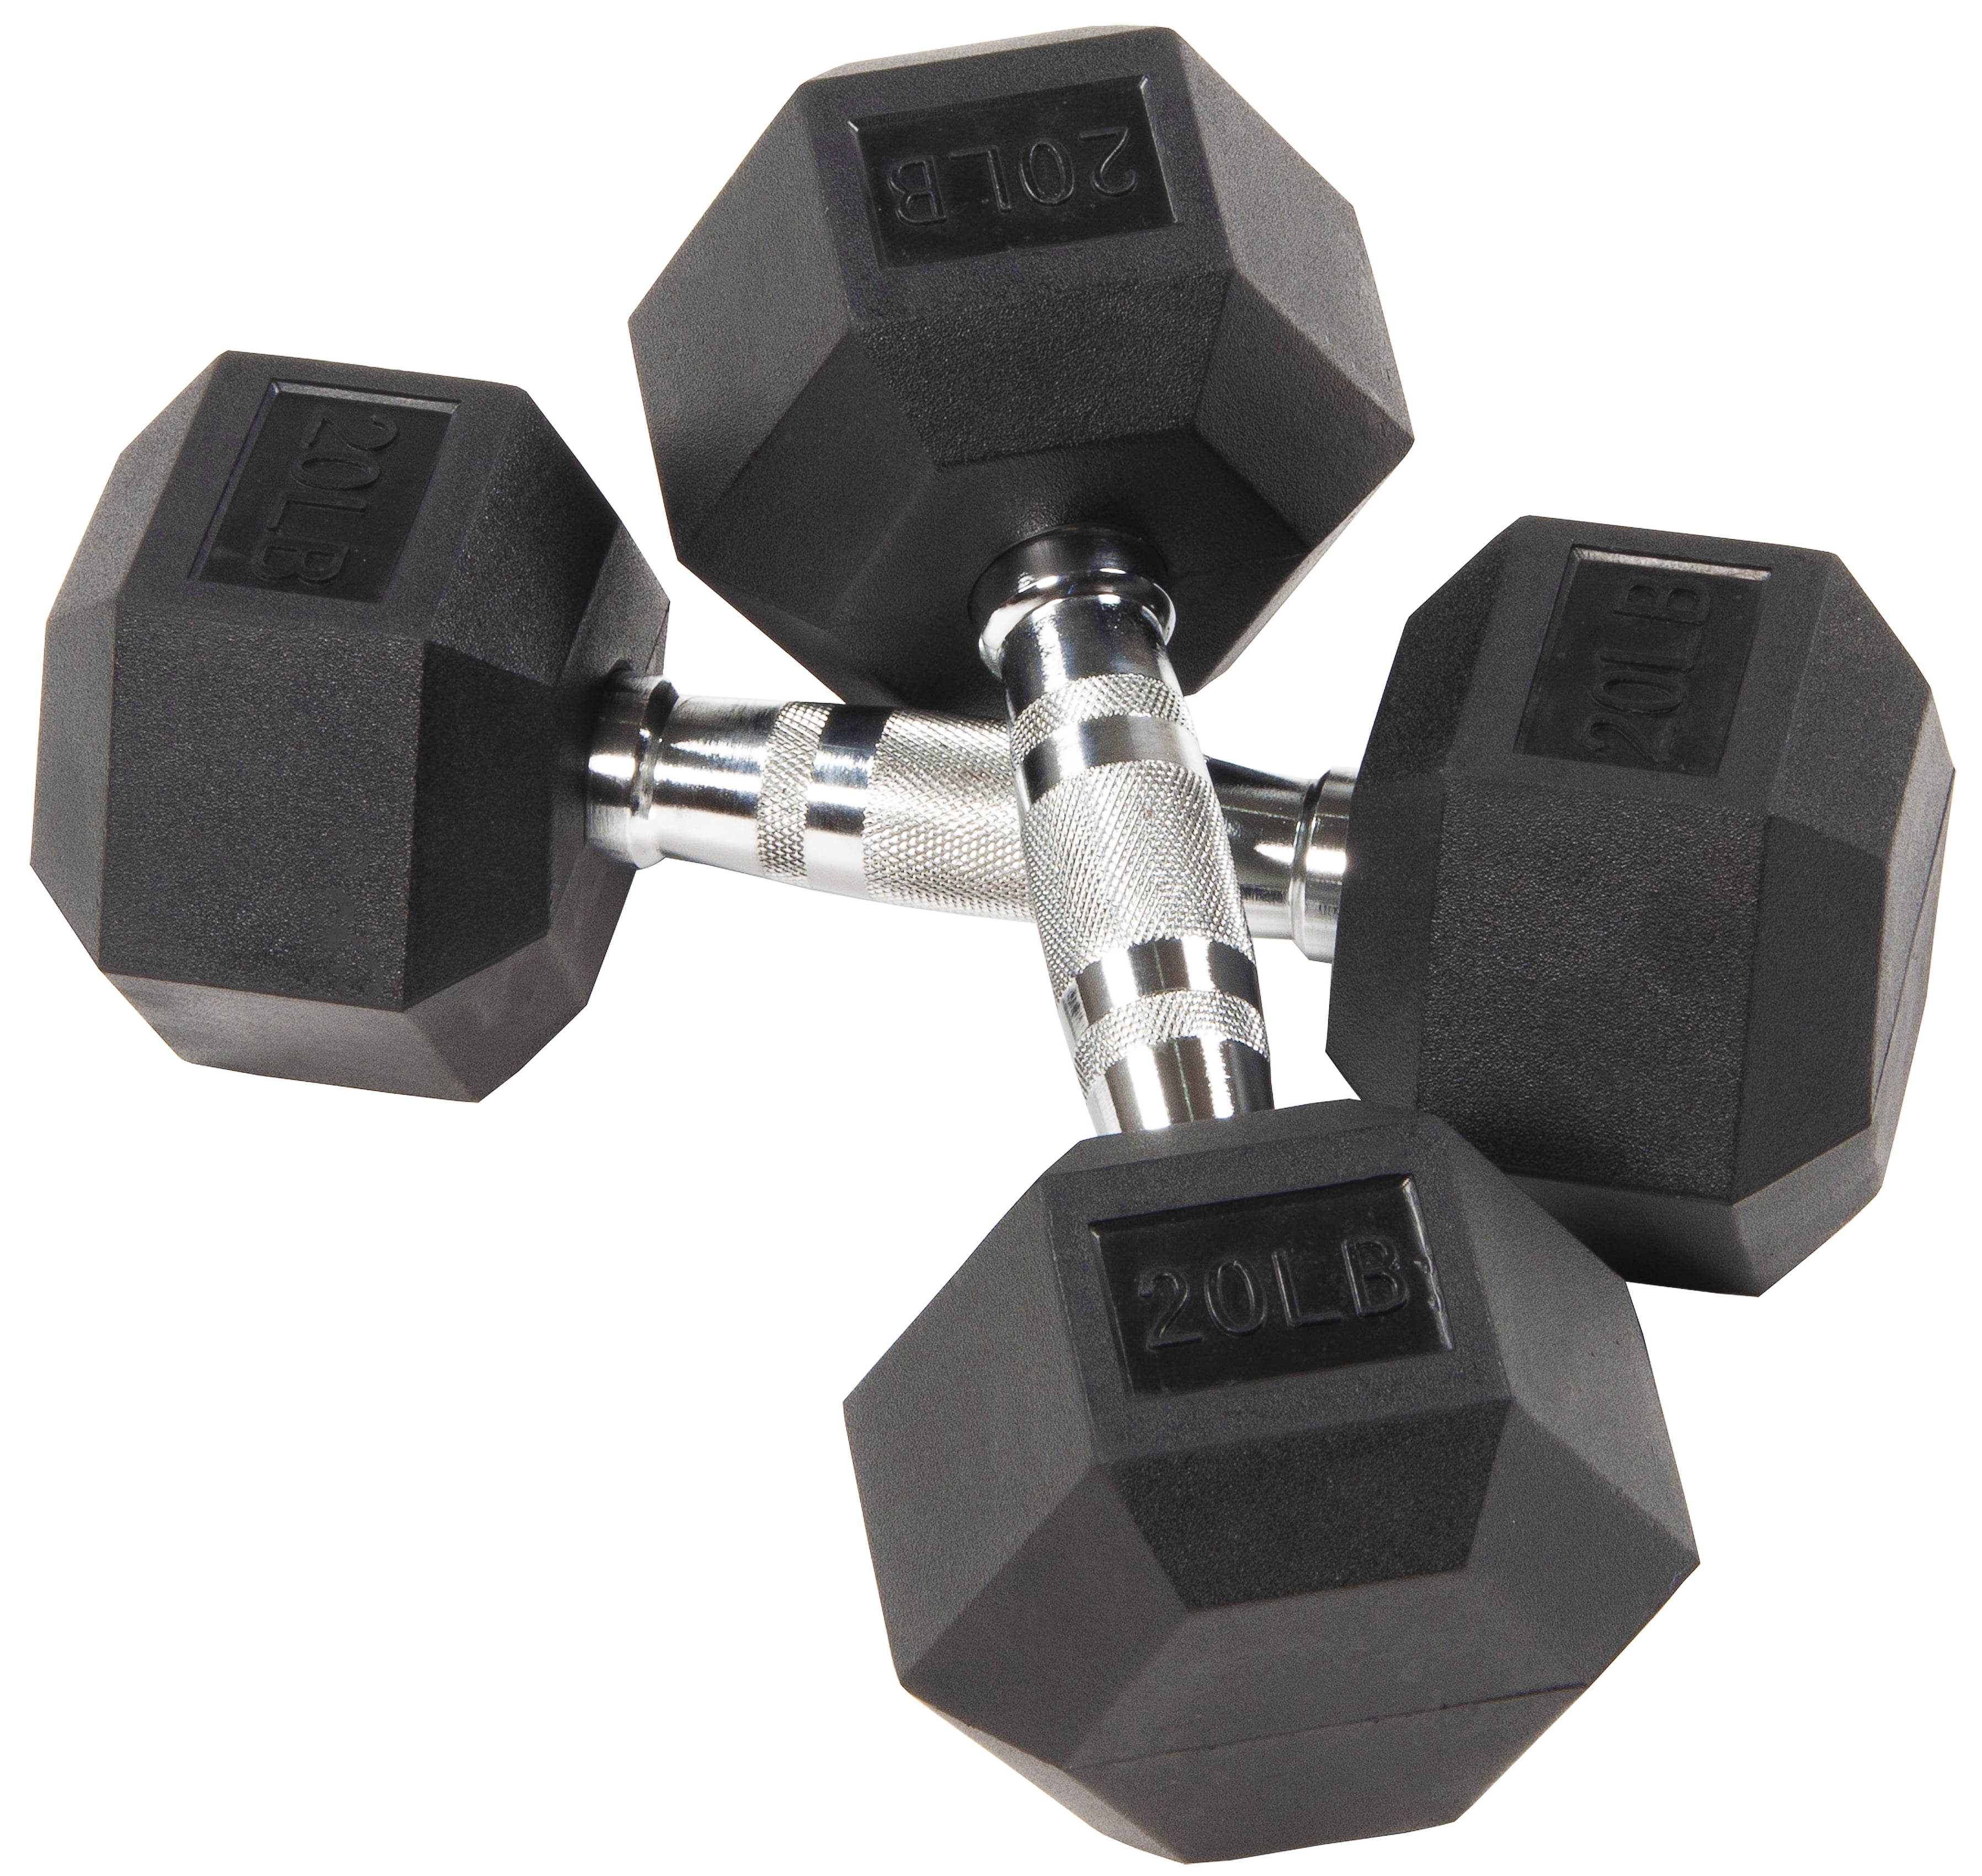 20 lbs Pair BalanceFrom Rubber Encased Hex Dumbbells 